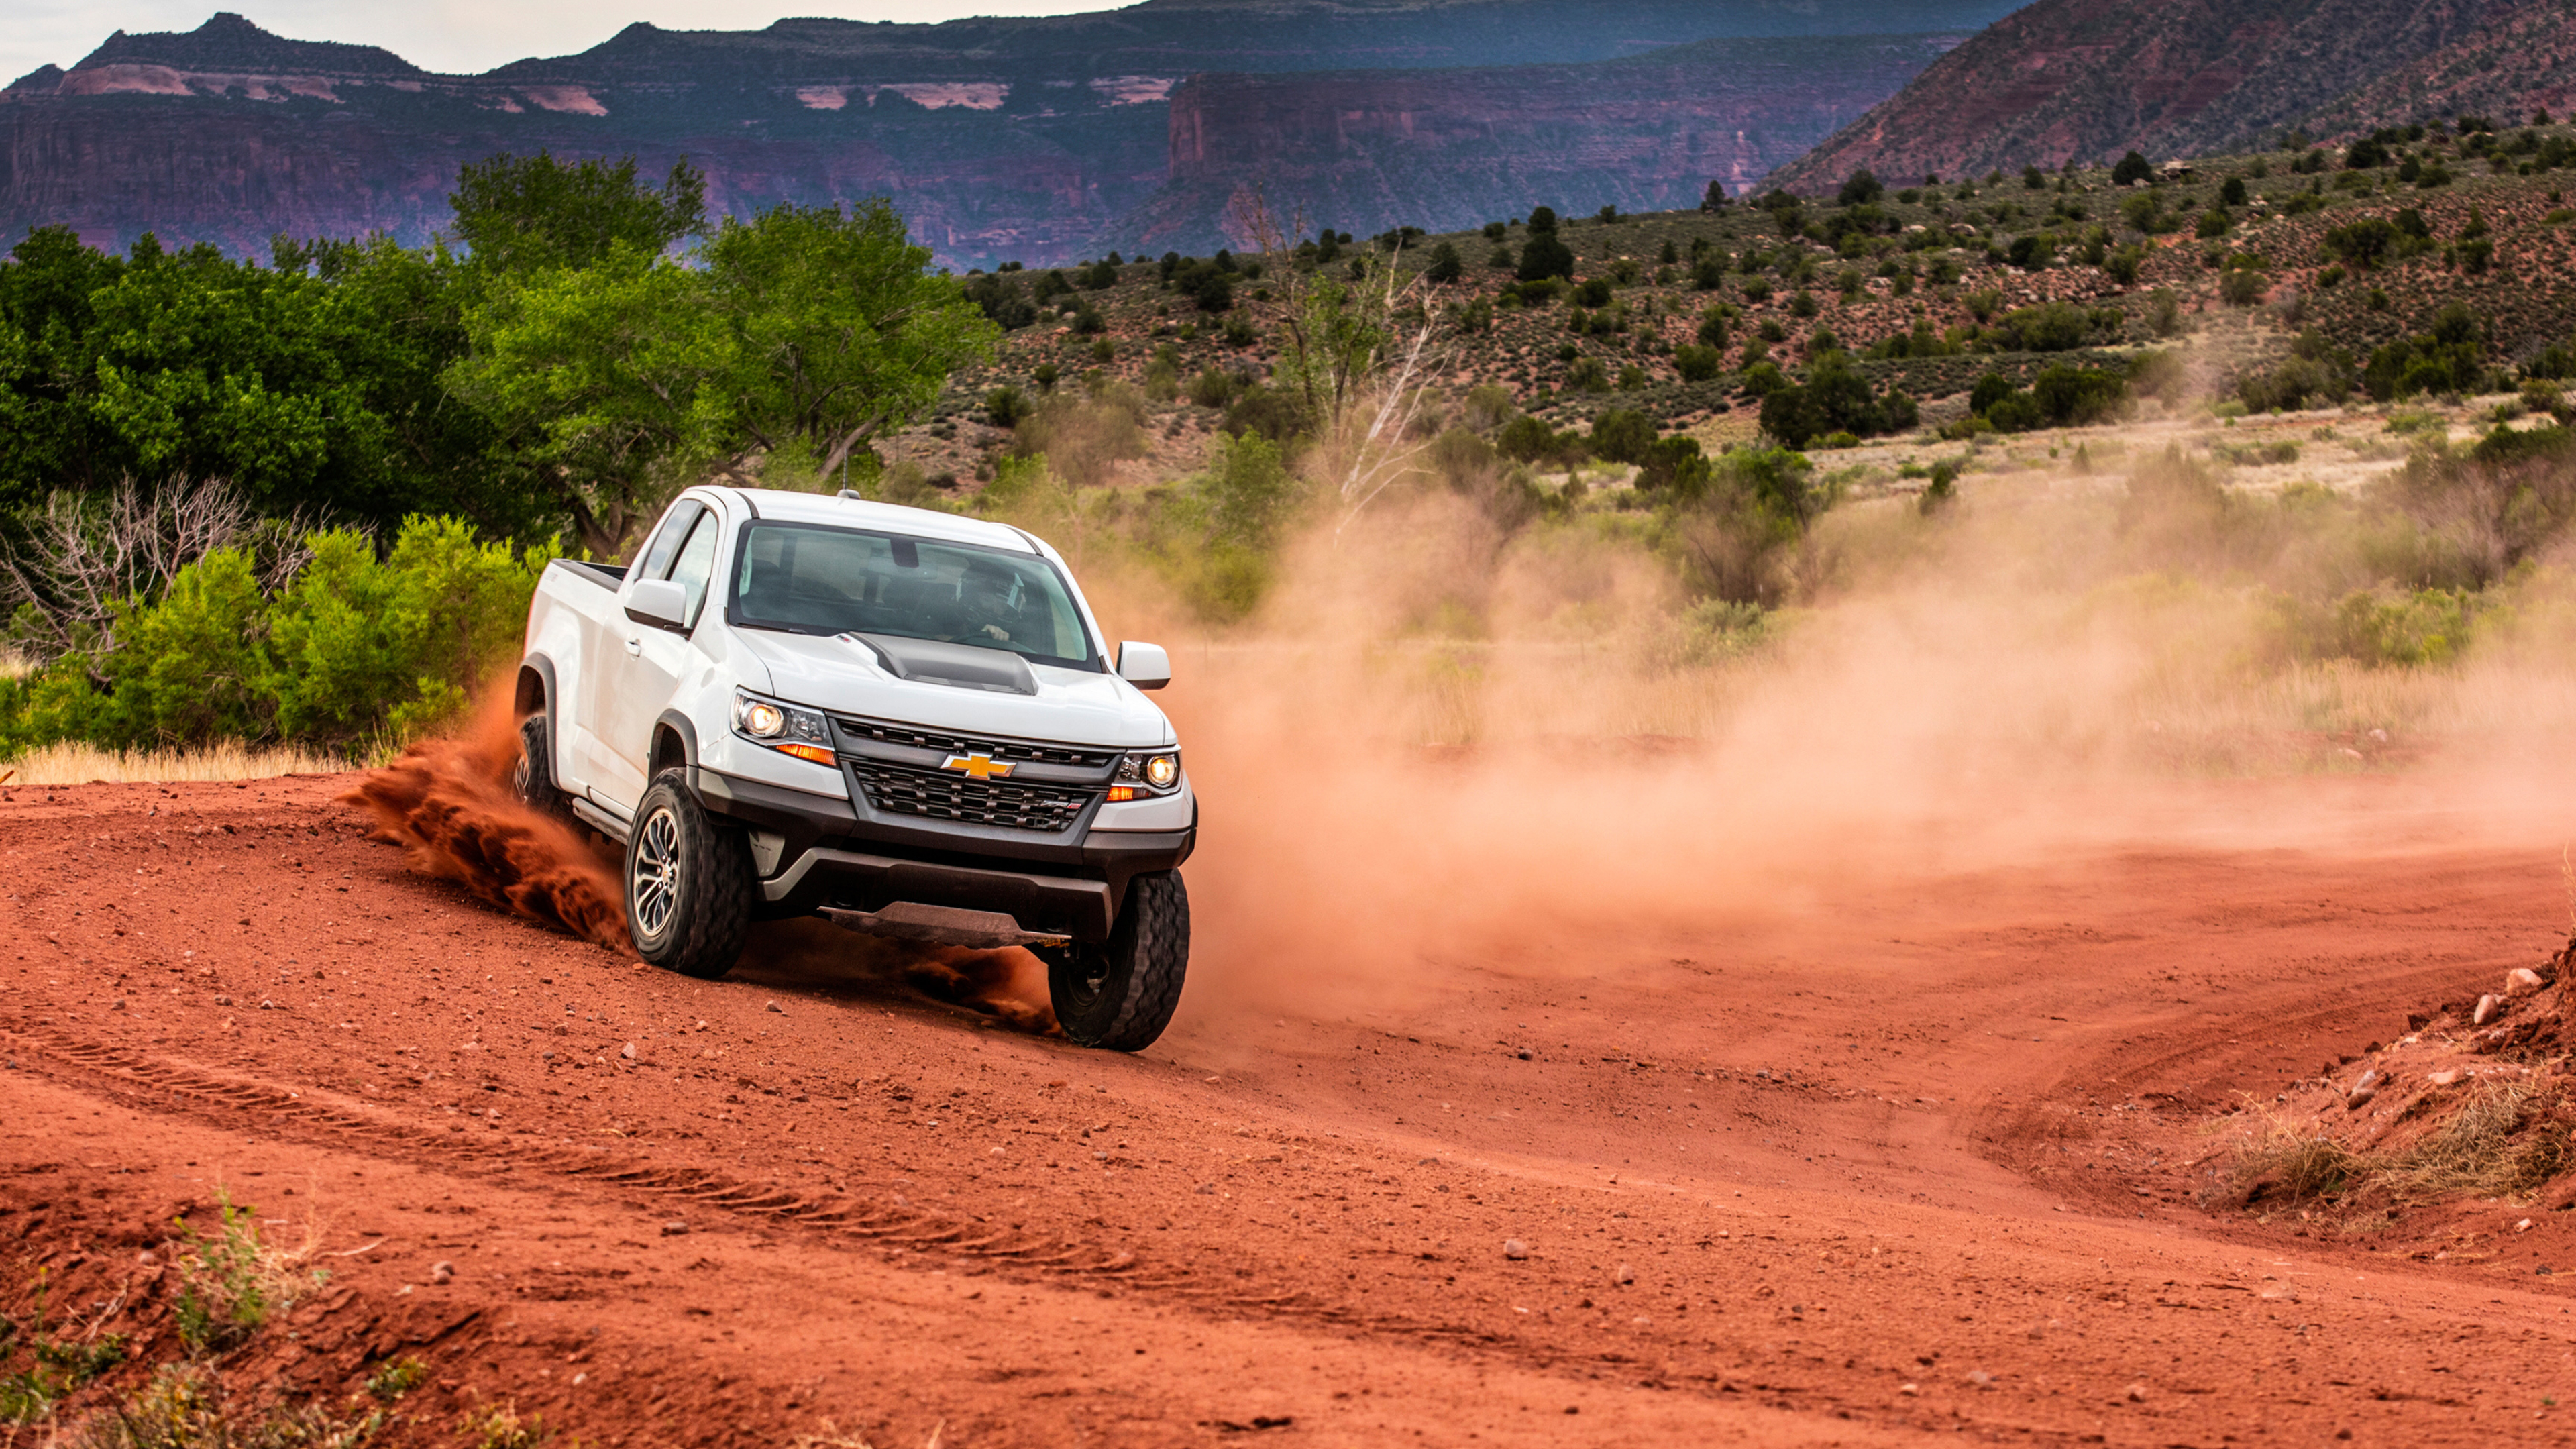 Off-road Driving: 2017 Chevrolet Colorado ZR2, Chevy, The high-performance truck market. 3840x2160 4K Background.